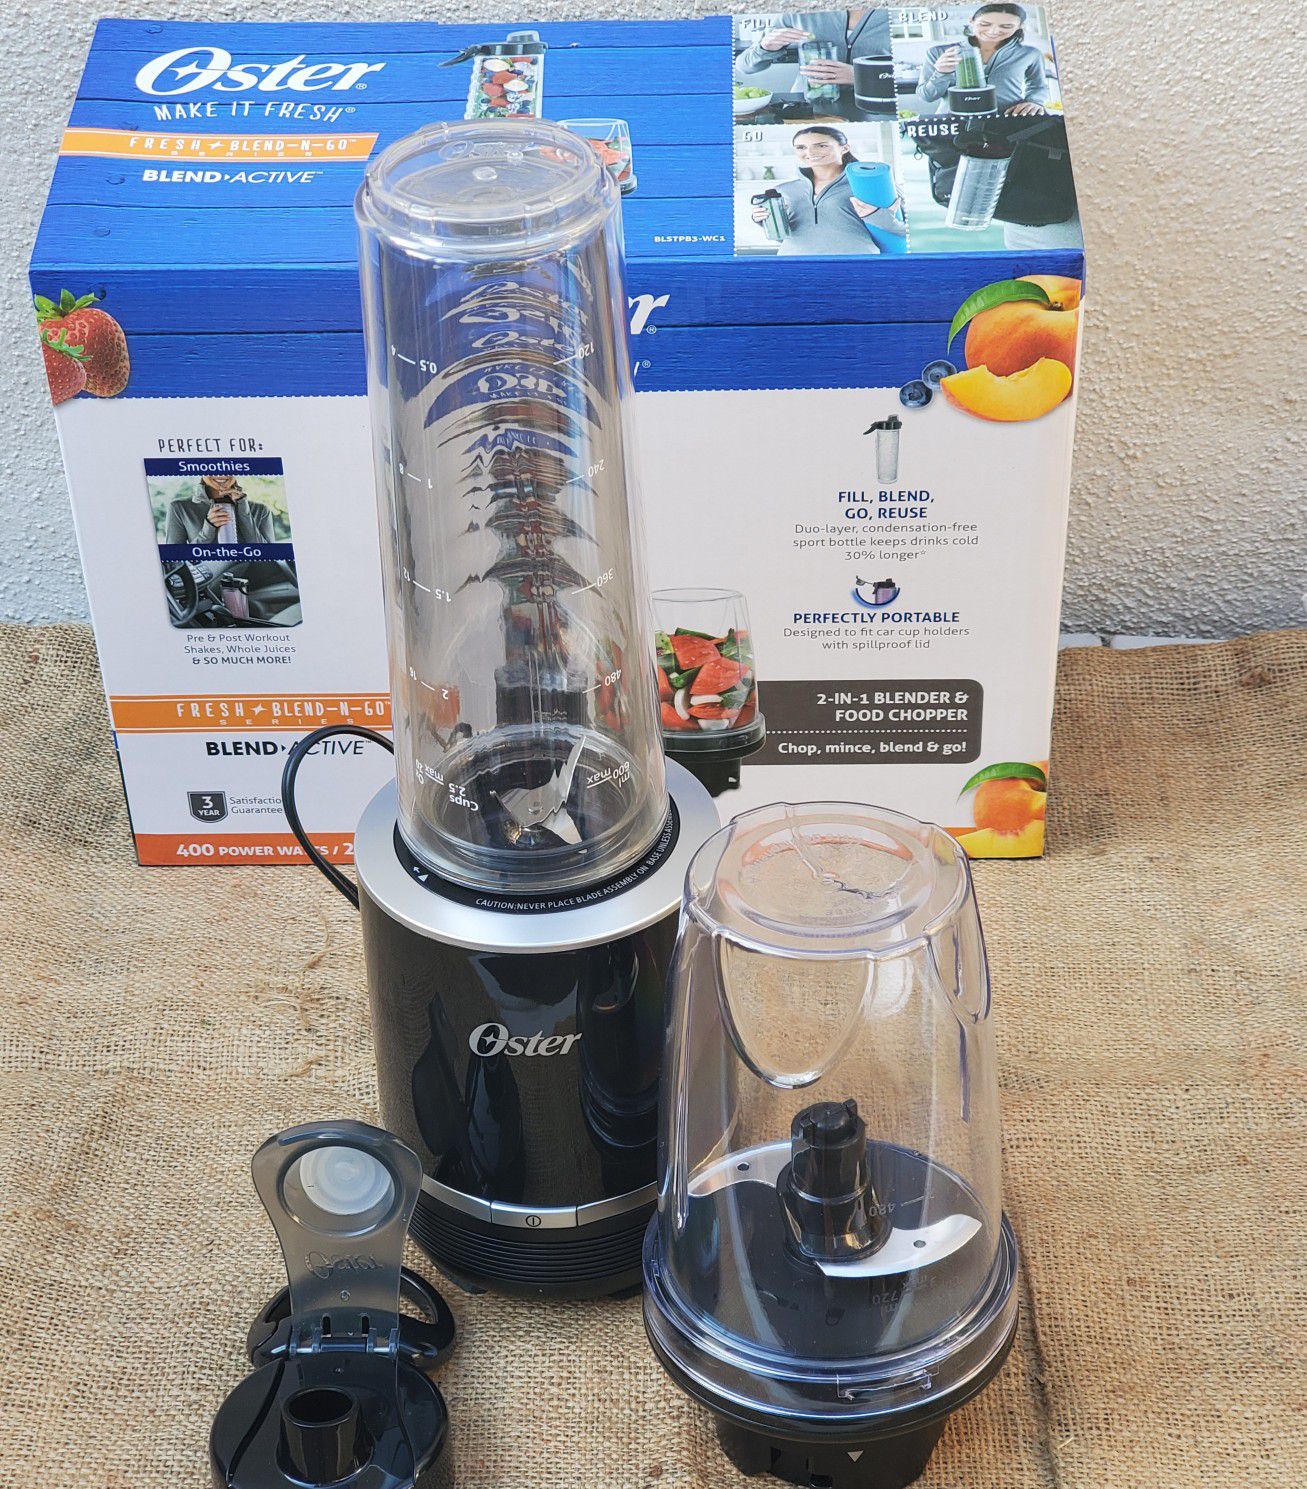 NEW OSTER Blend*Active 2-in-1 Blender and Food Chopper